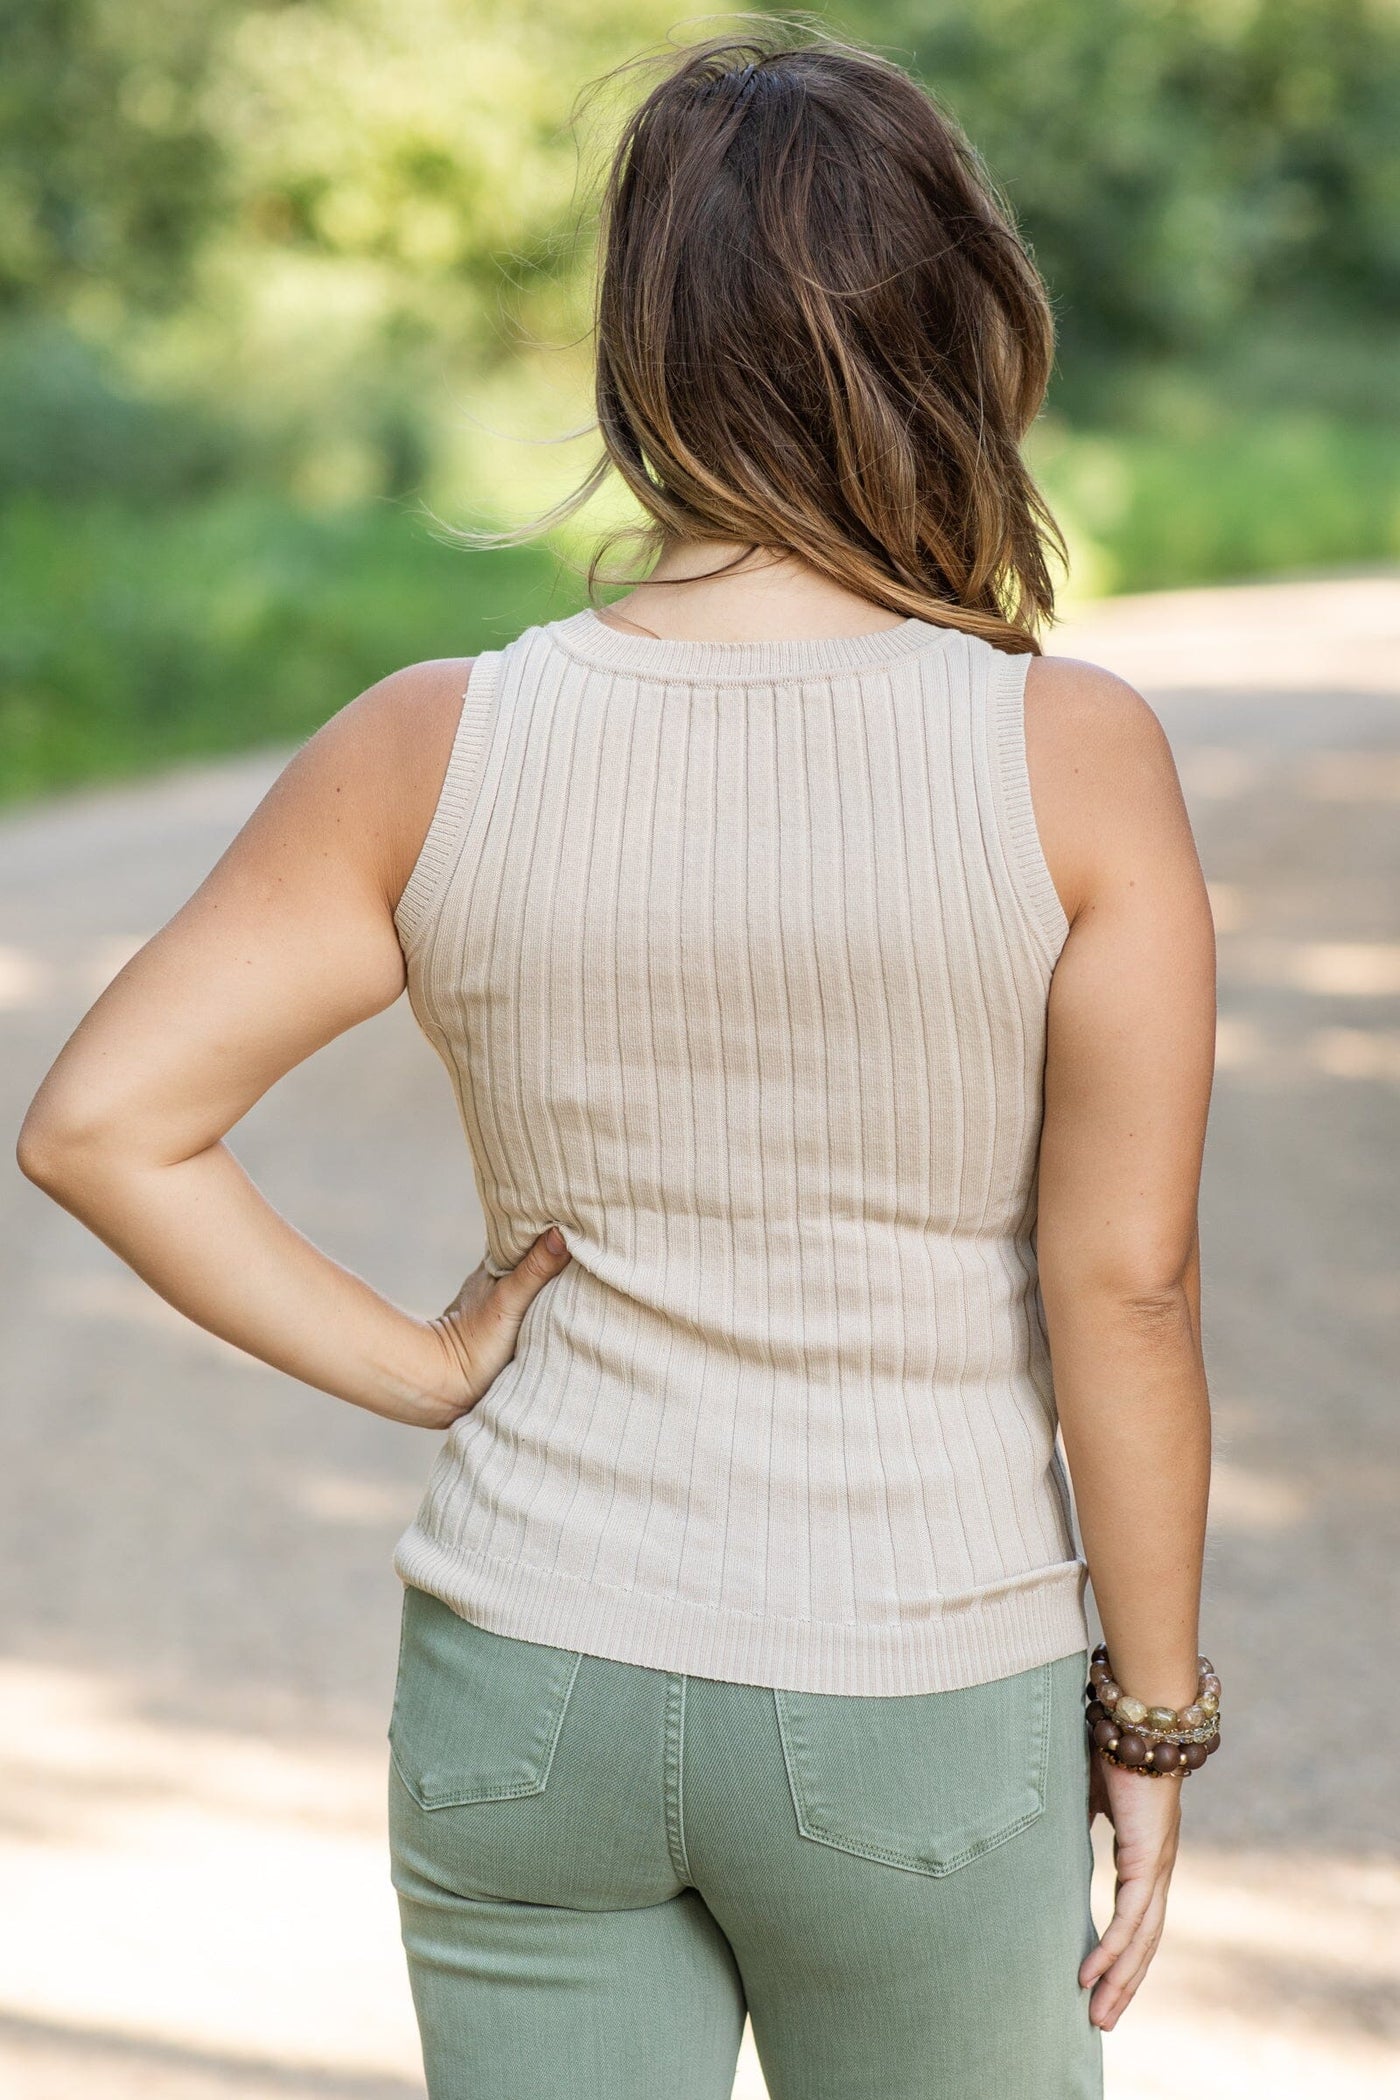 Beige Texture Sweater Knit Tank - Filly Flair